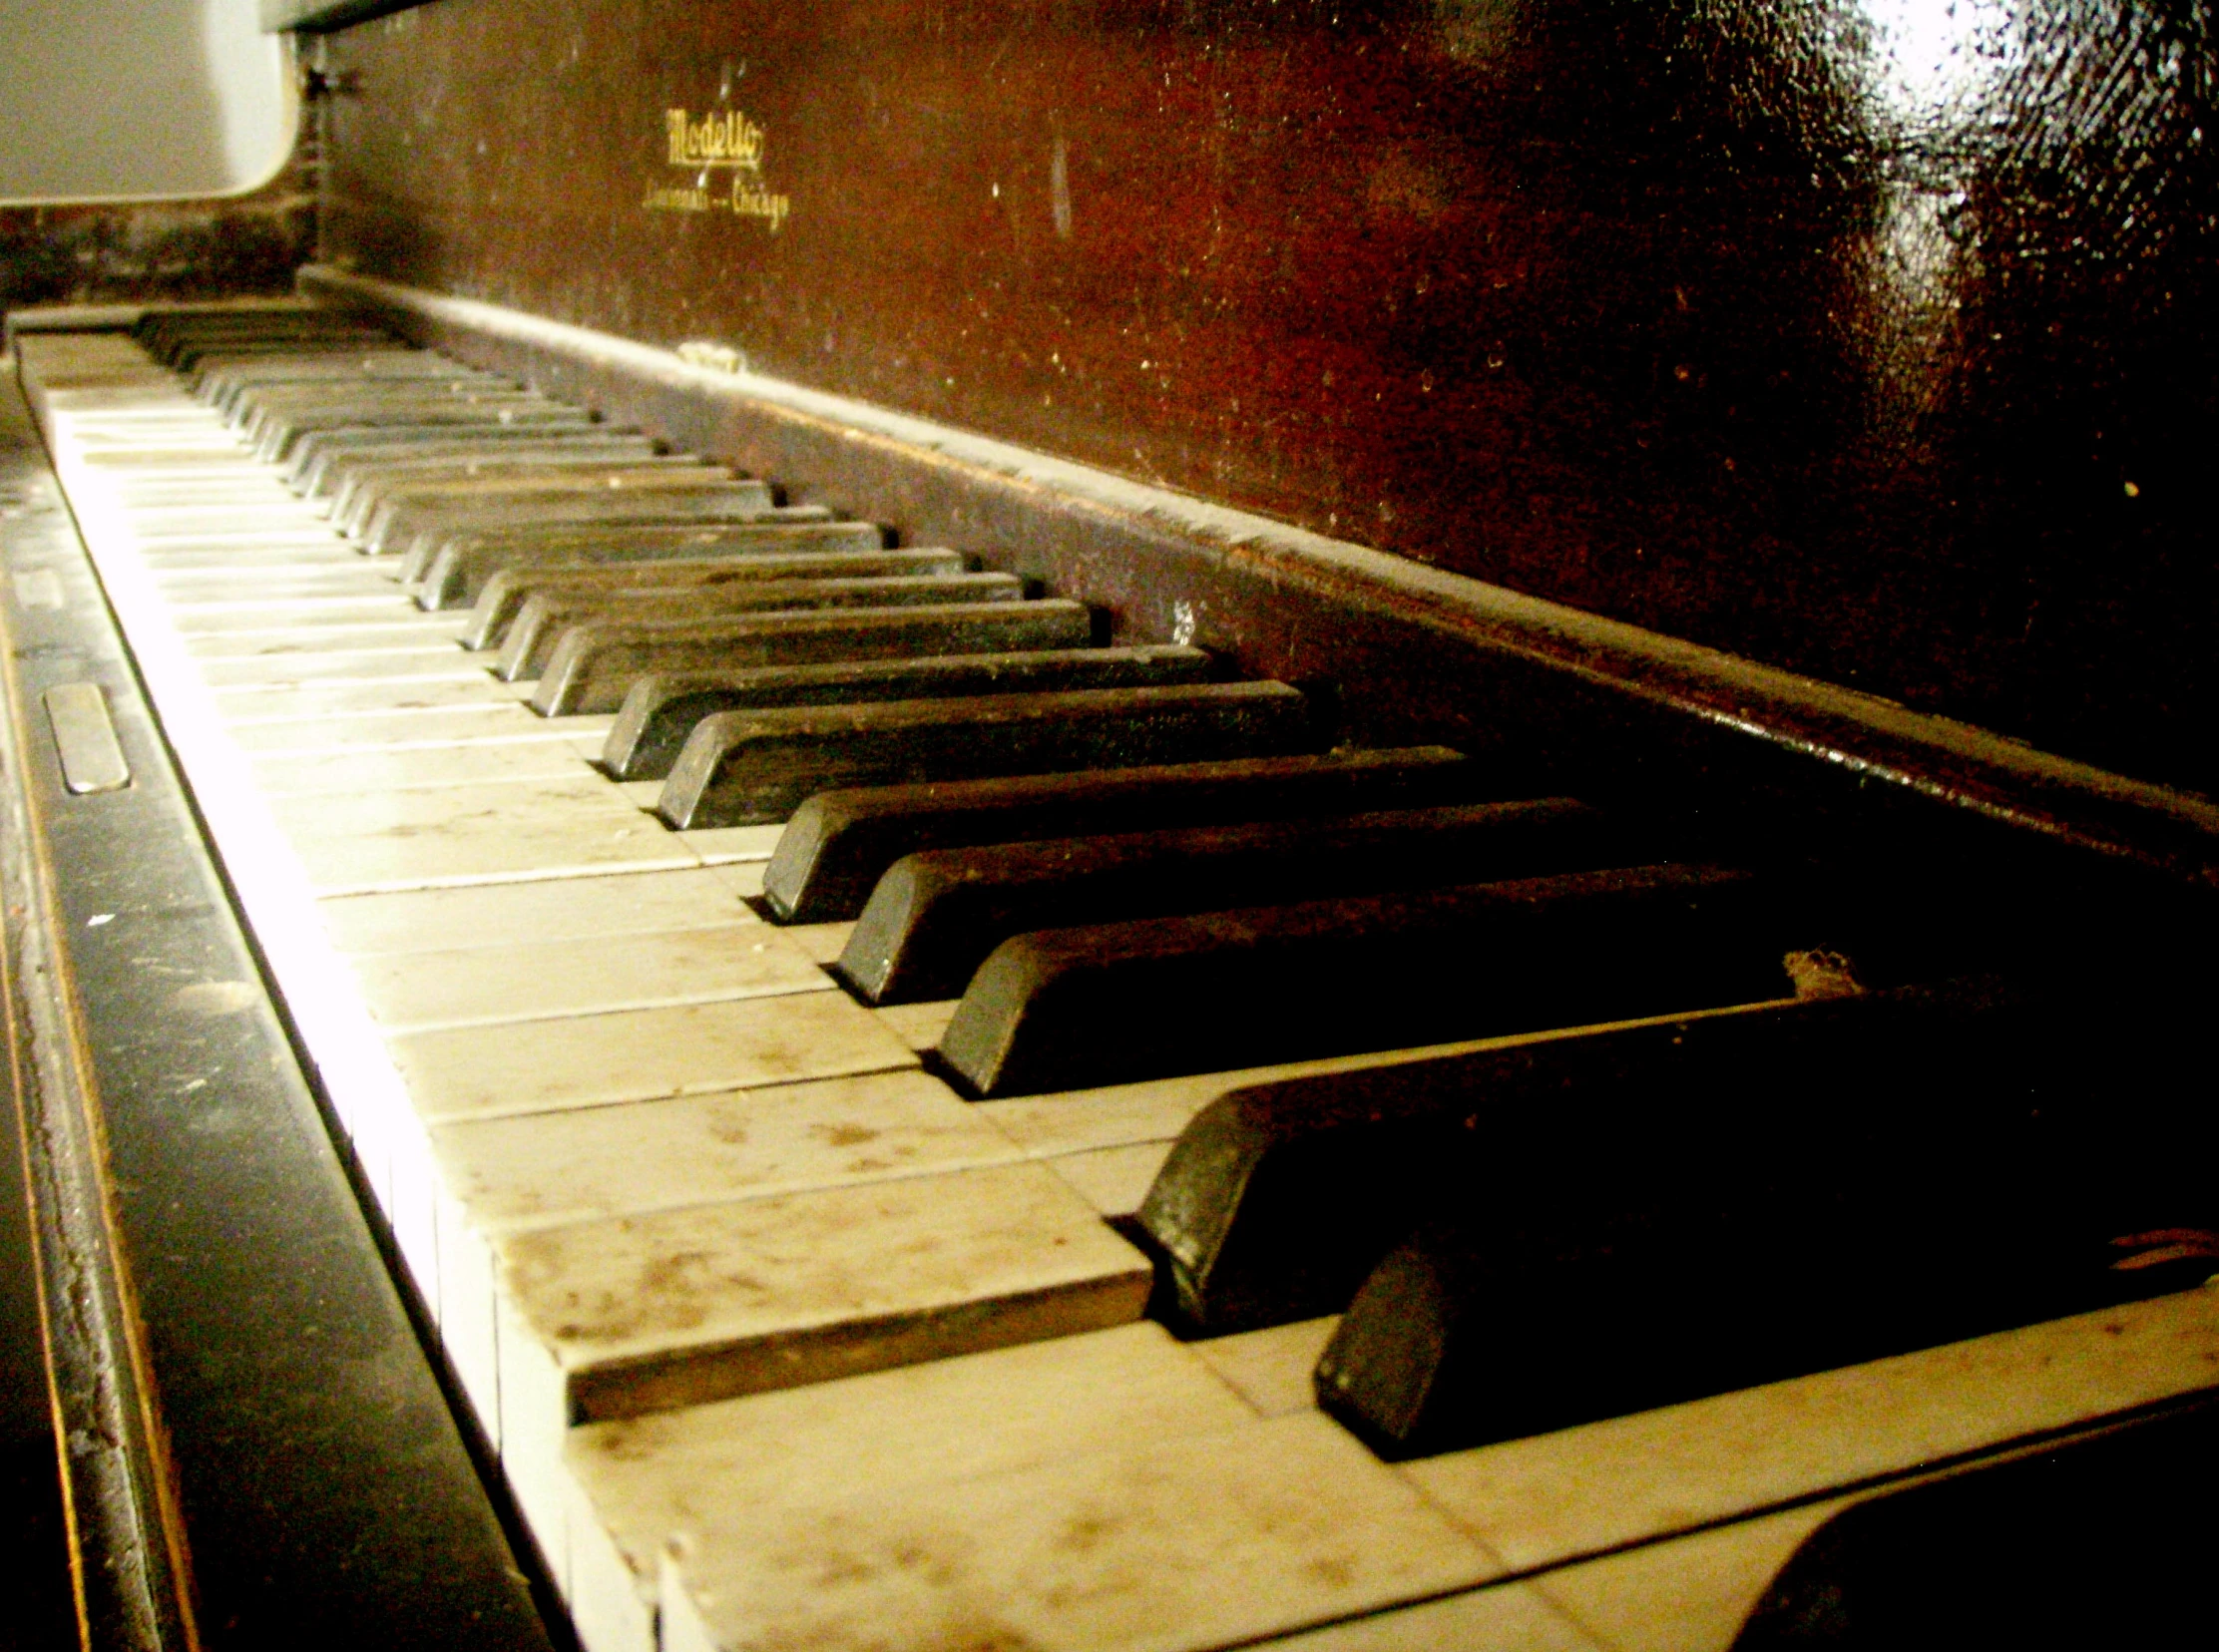 a close up view of an upright piano